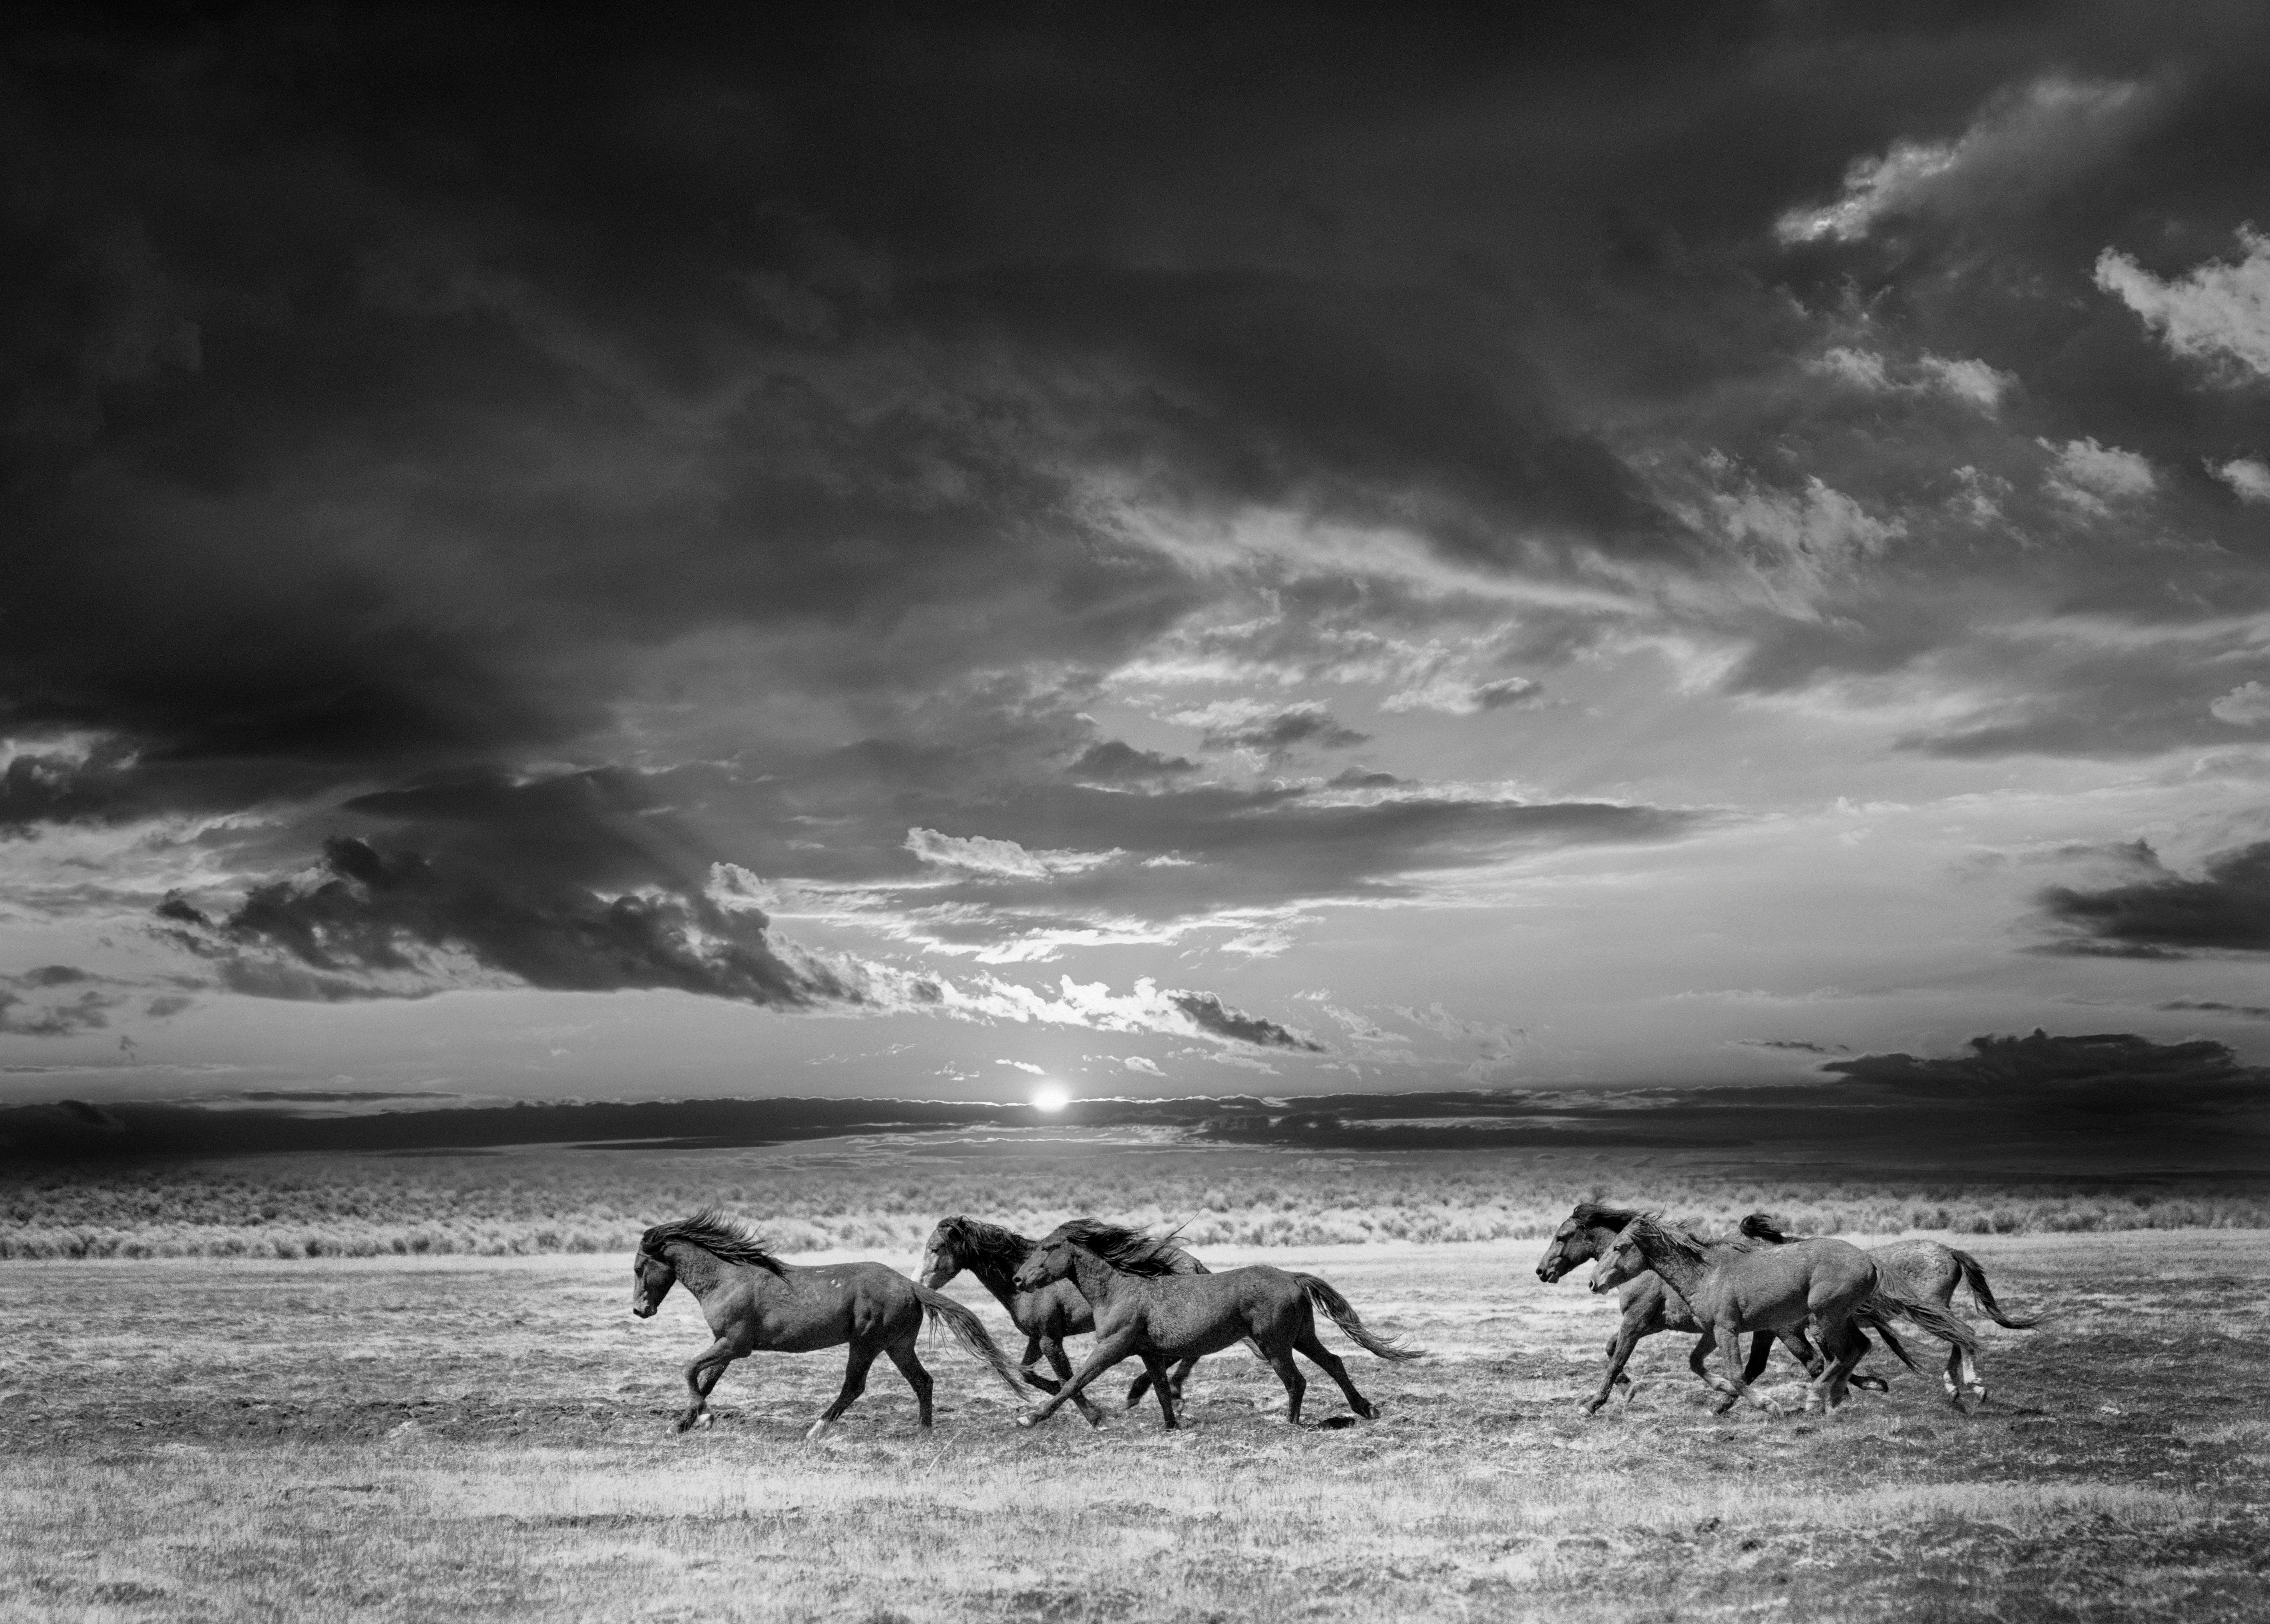 Shane Russeck Animal Print - Black and White Wild Horses Photography Mustangs, "Chasing the Light"  30x40 Art